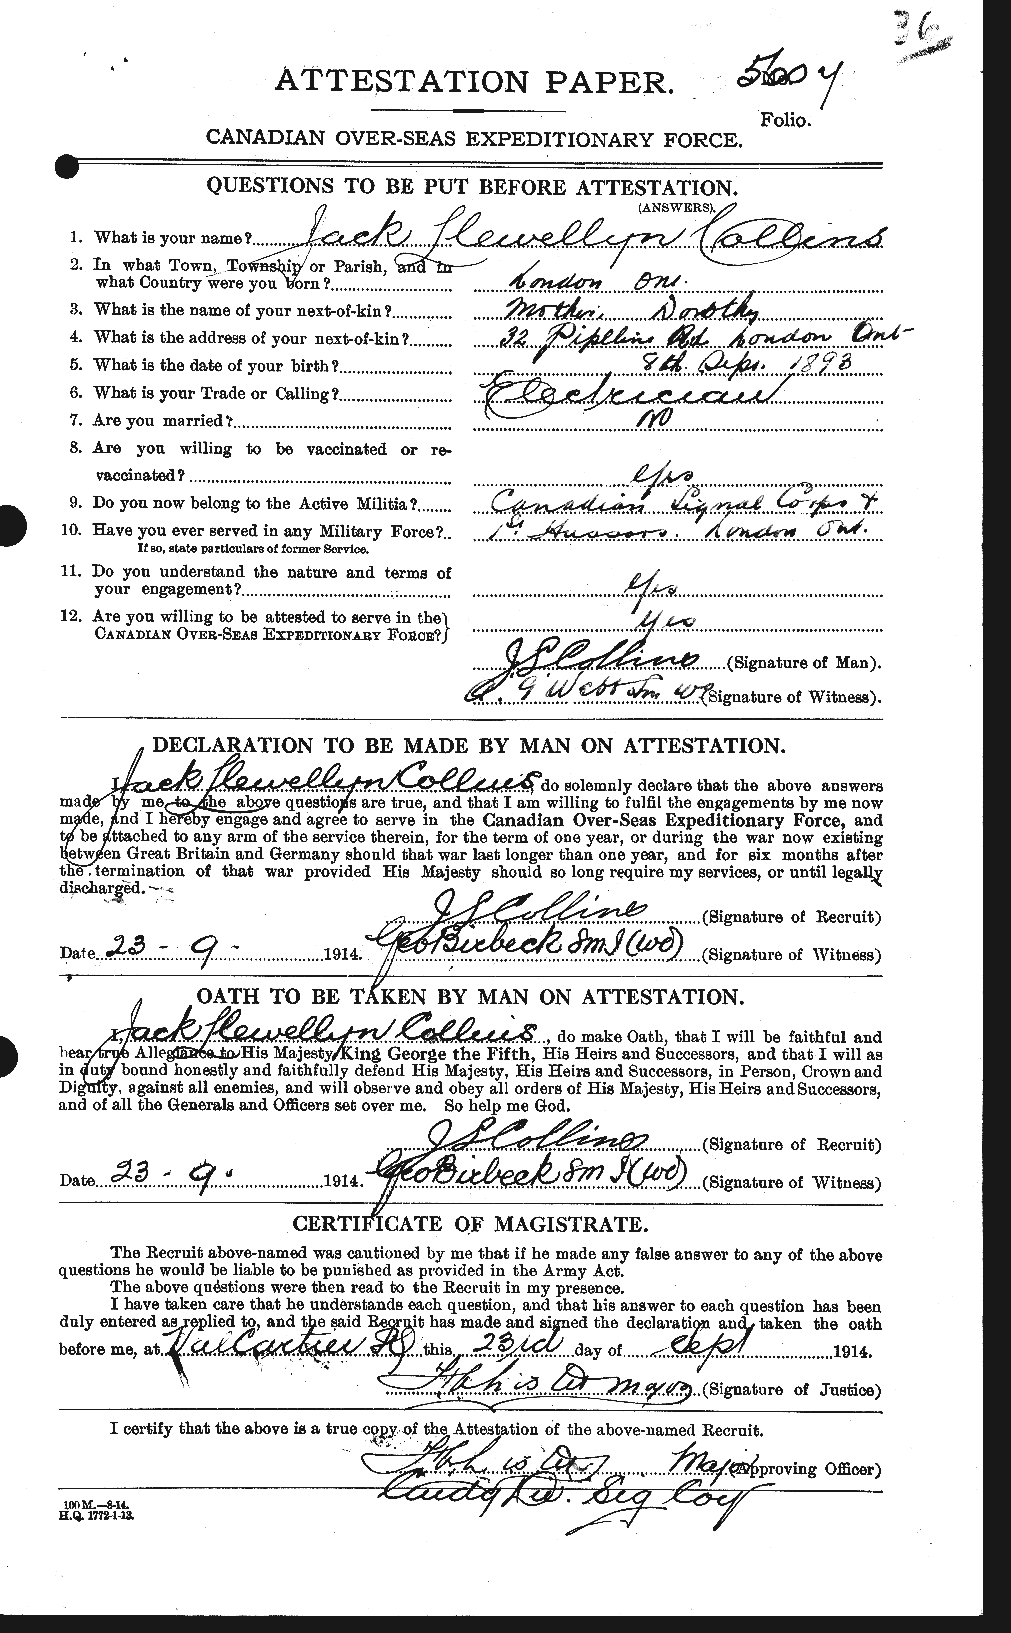 Personnel Records of the First World War - CEF 069984a